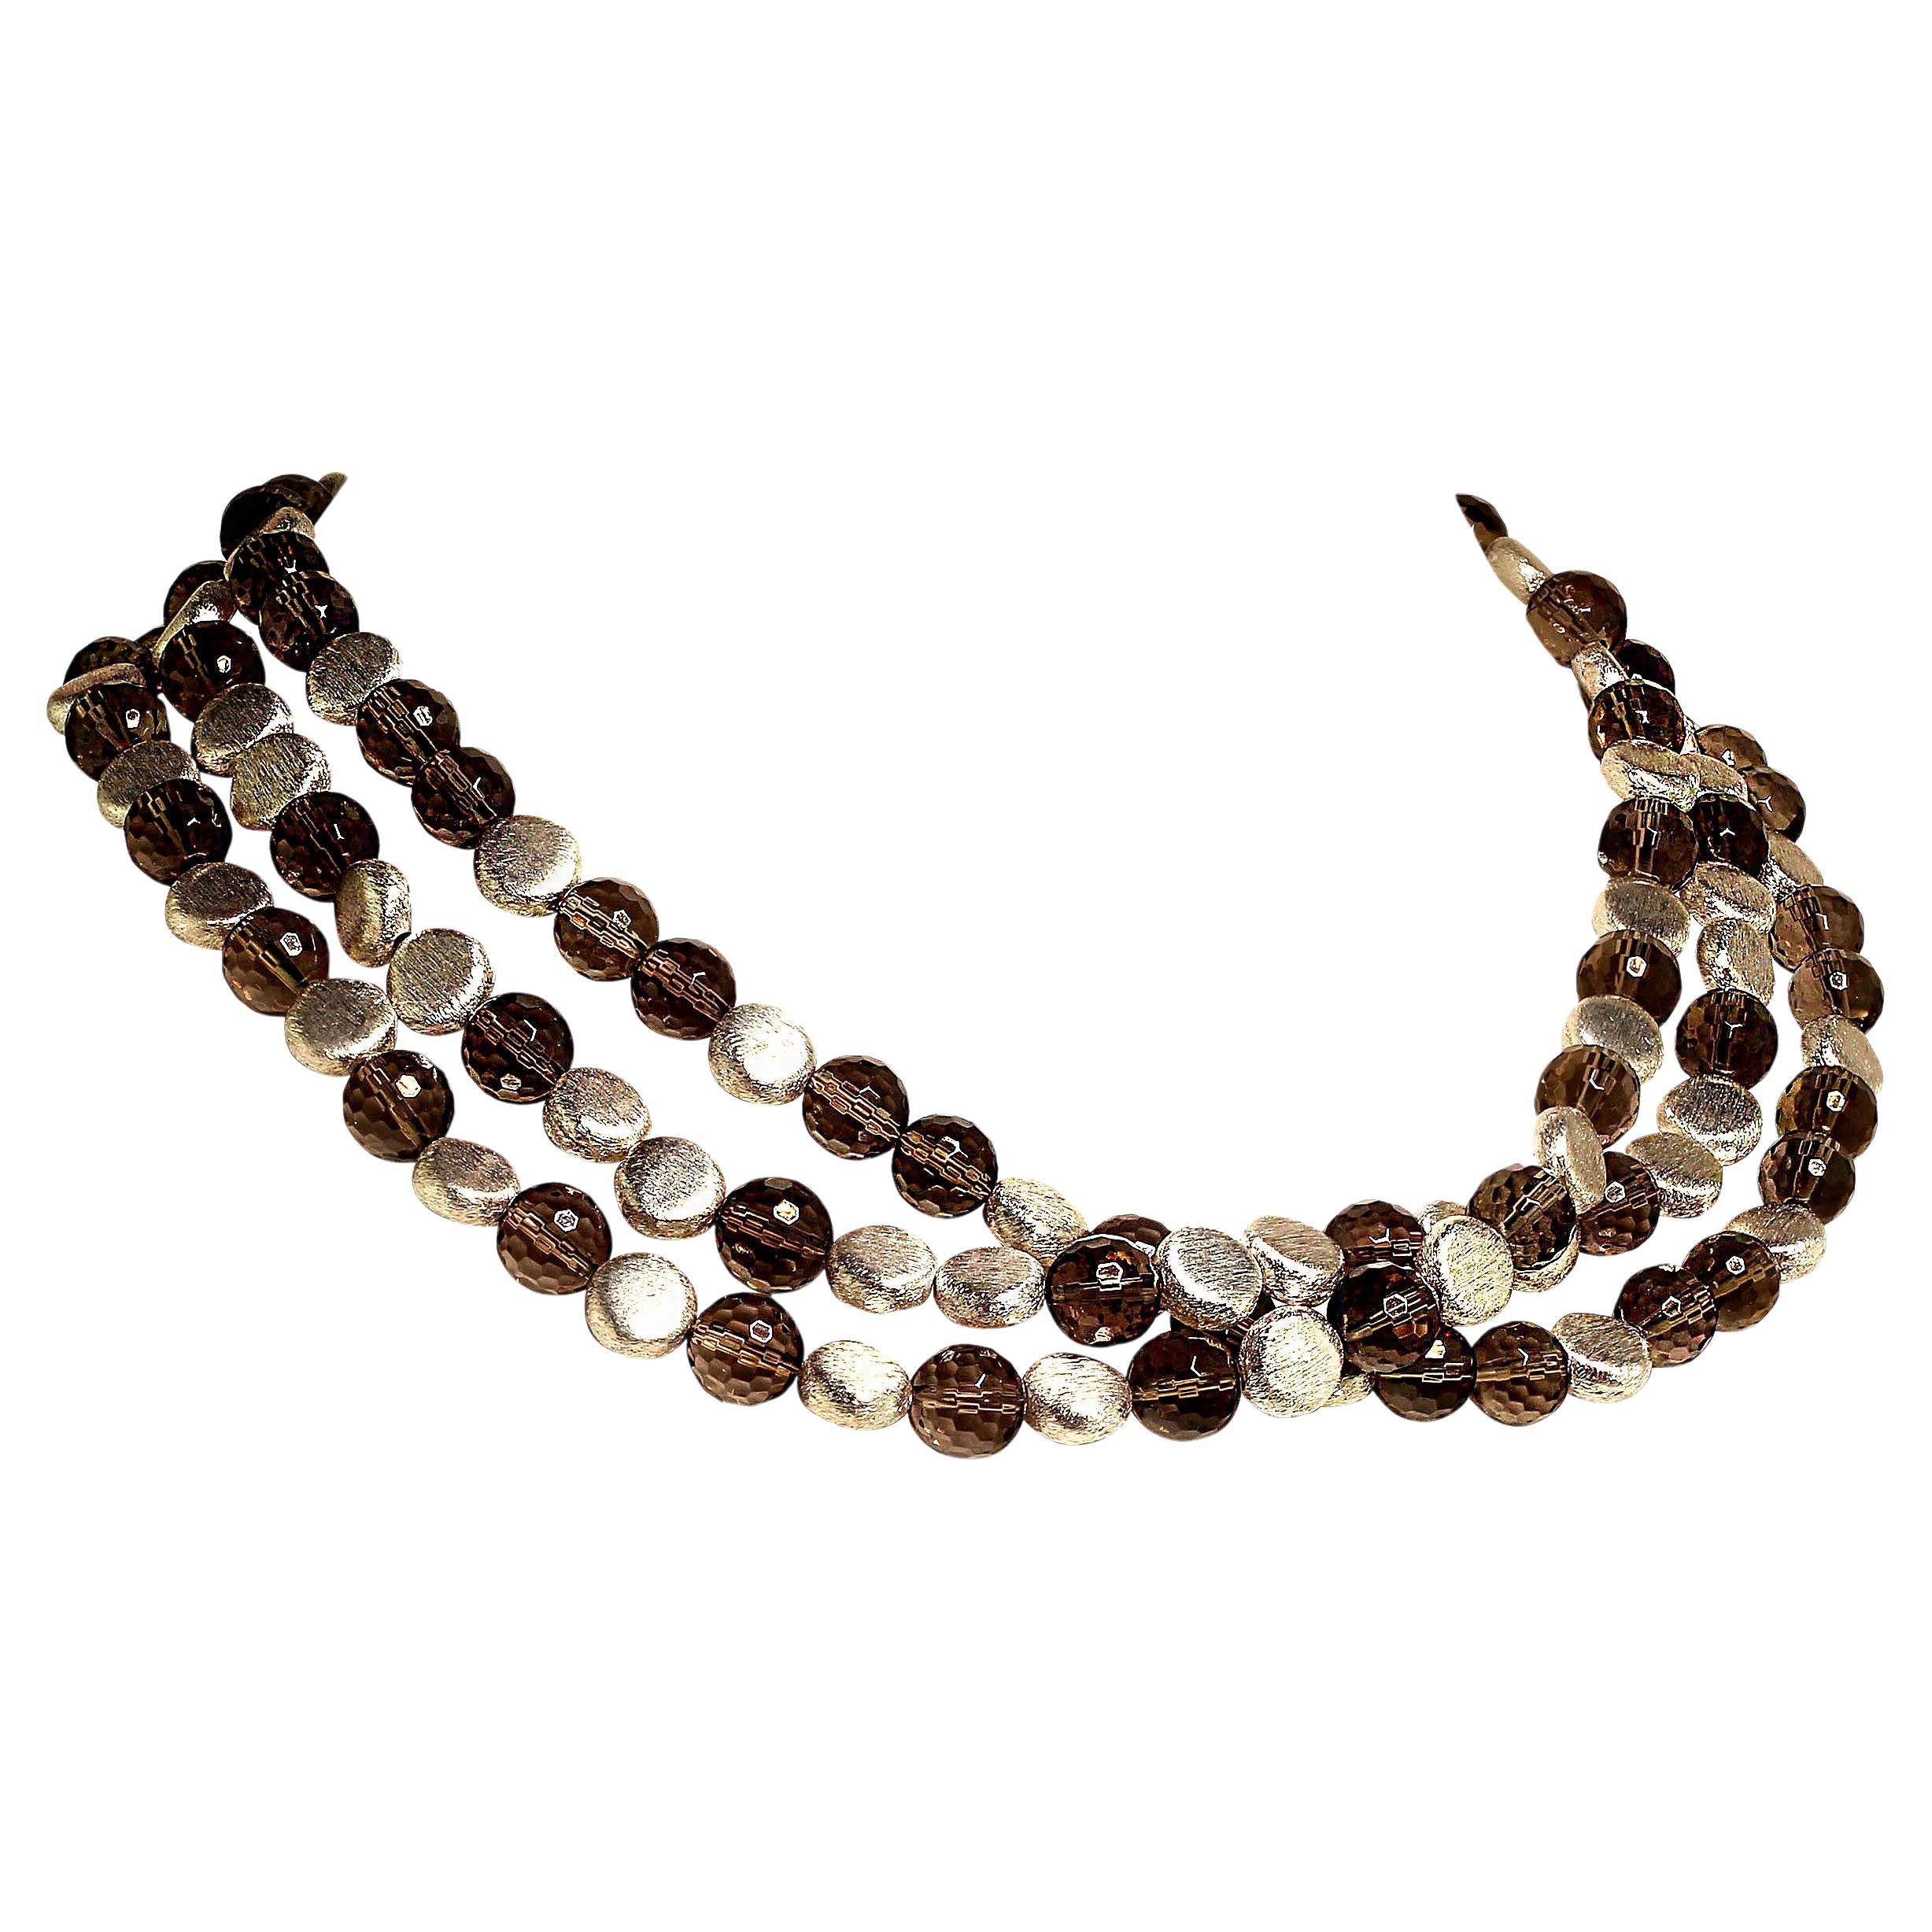 Unique three strands of sparkling, 10 MM round faceted Smoky Quartz interspersed with frosted silver tone discs necklace. These medium tone Smoky Quartz are very bright and sparkly. The three strands can be gently twisted for a completely different,